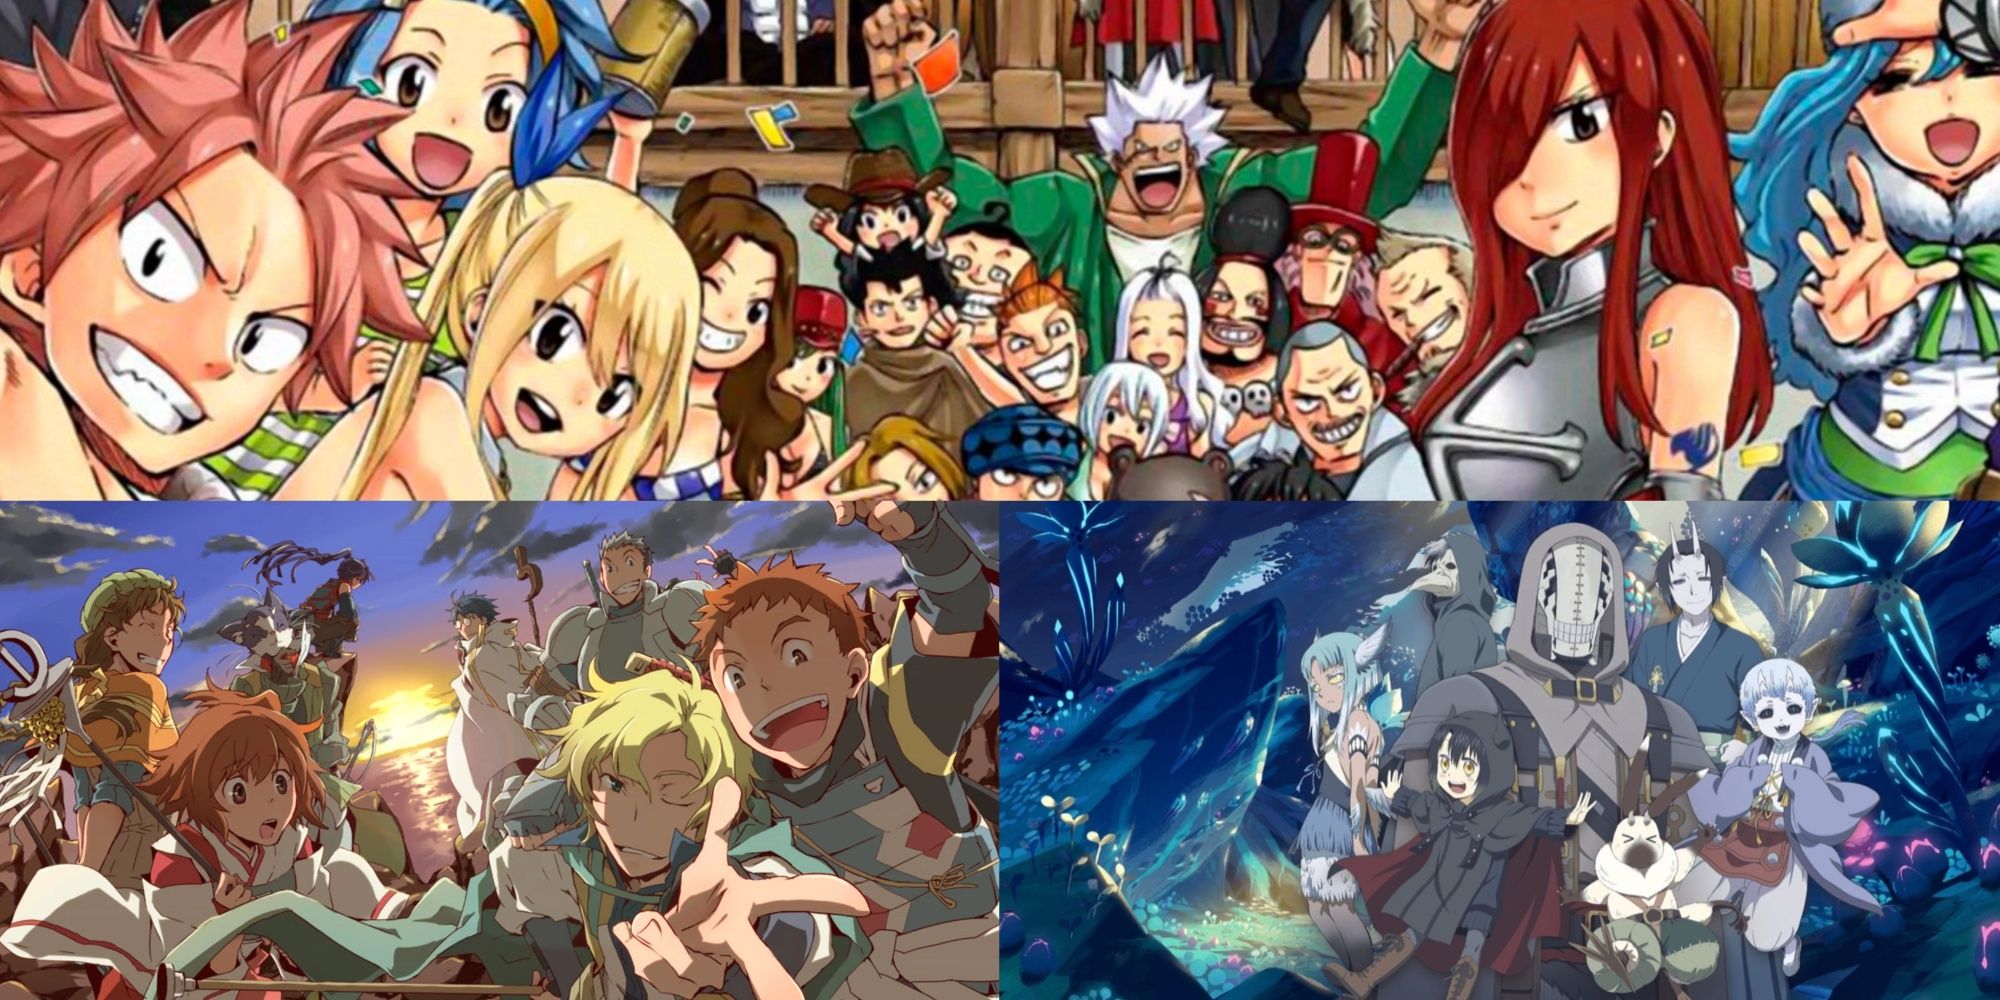 Log Horizon, Fairy Tail and Somali and the forest spirit